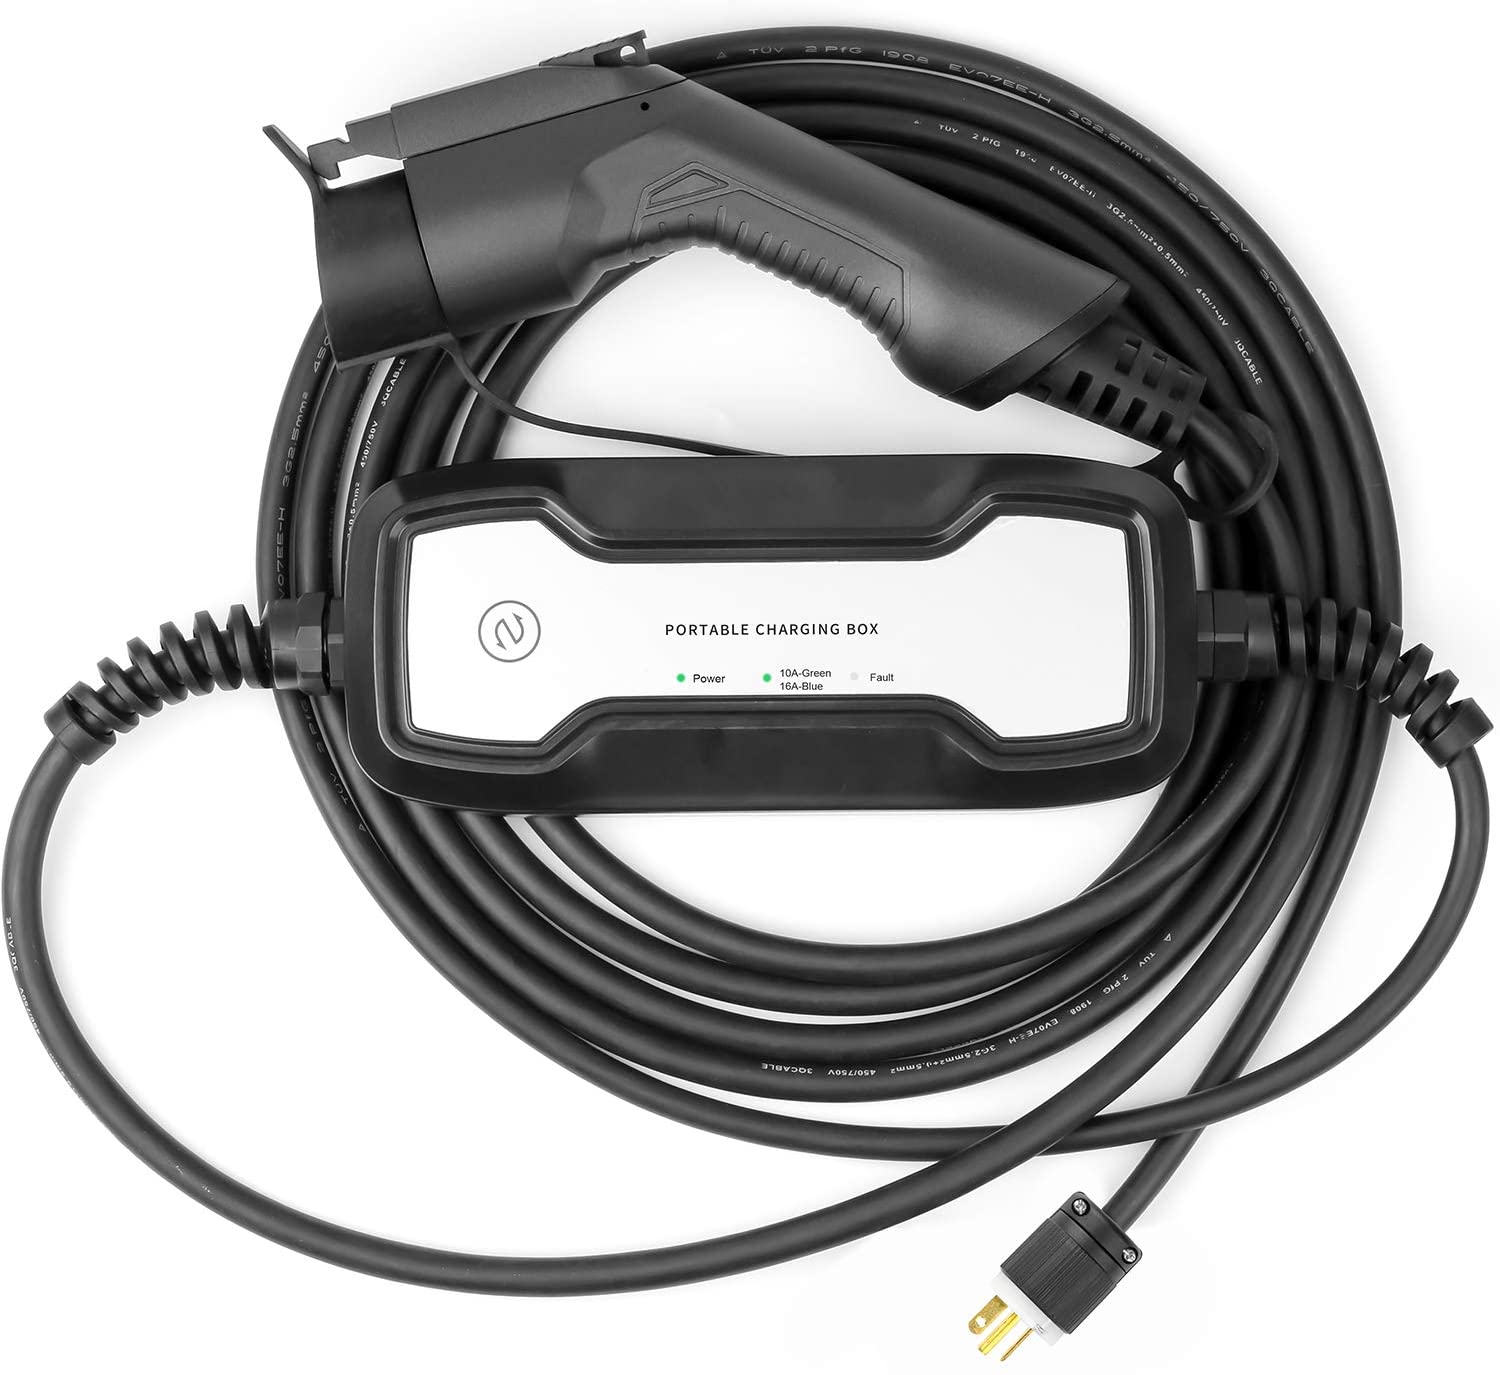 NEMA6-20 and NEMA5-150 Southking Level 1-2 EV Charger Cable Portable EVSE Electric Vehicle Charging Station for Chevy Volt,Tesla Model and All Type 1 SAE J1772 Standard 85-265V, 10/20A, 